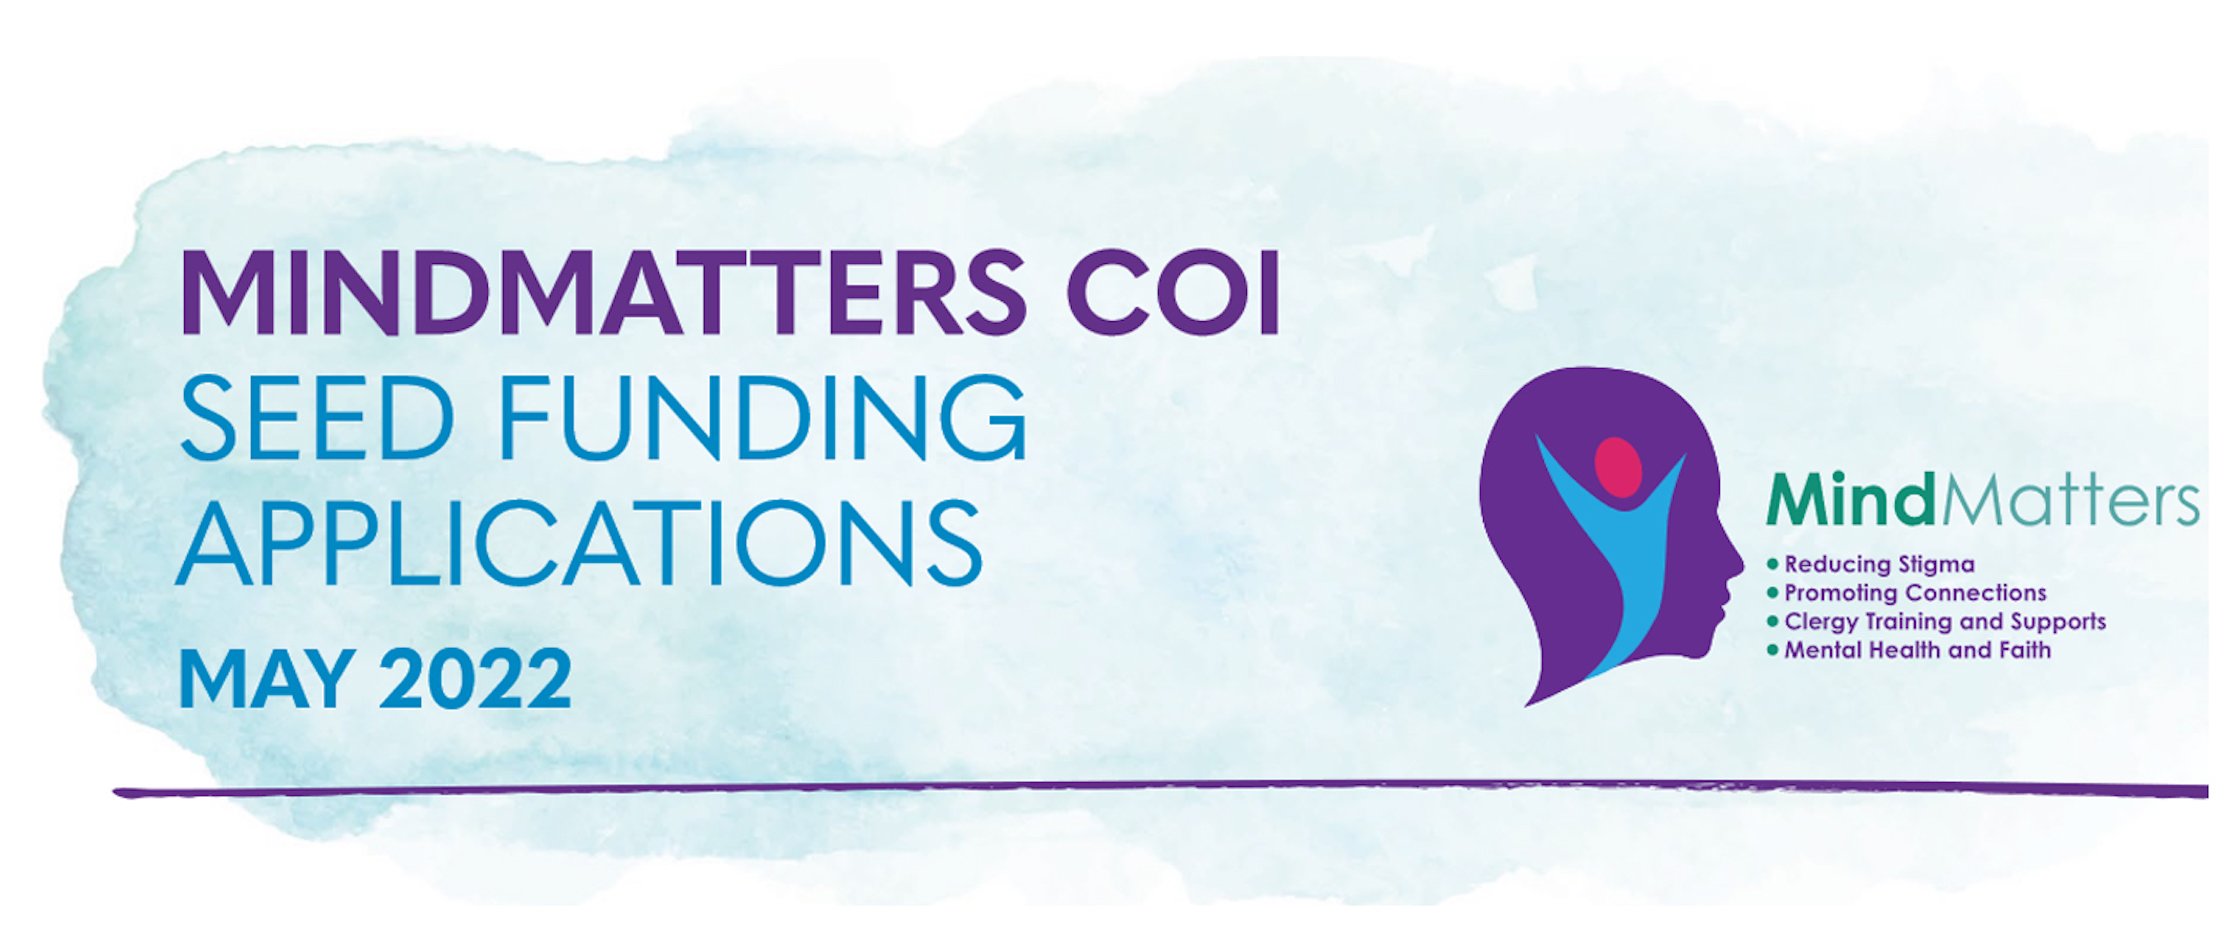 Mind Matters funding available